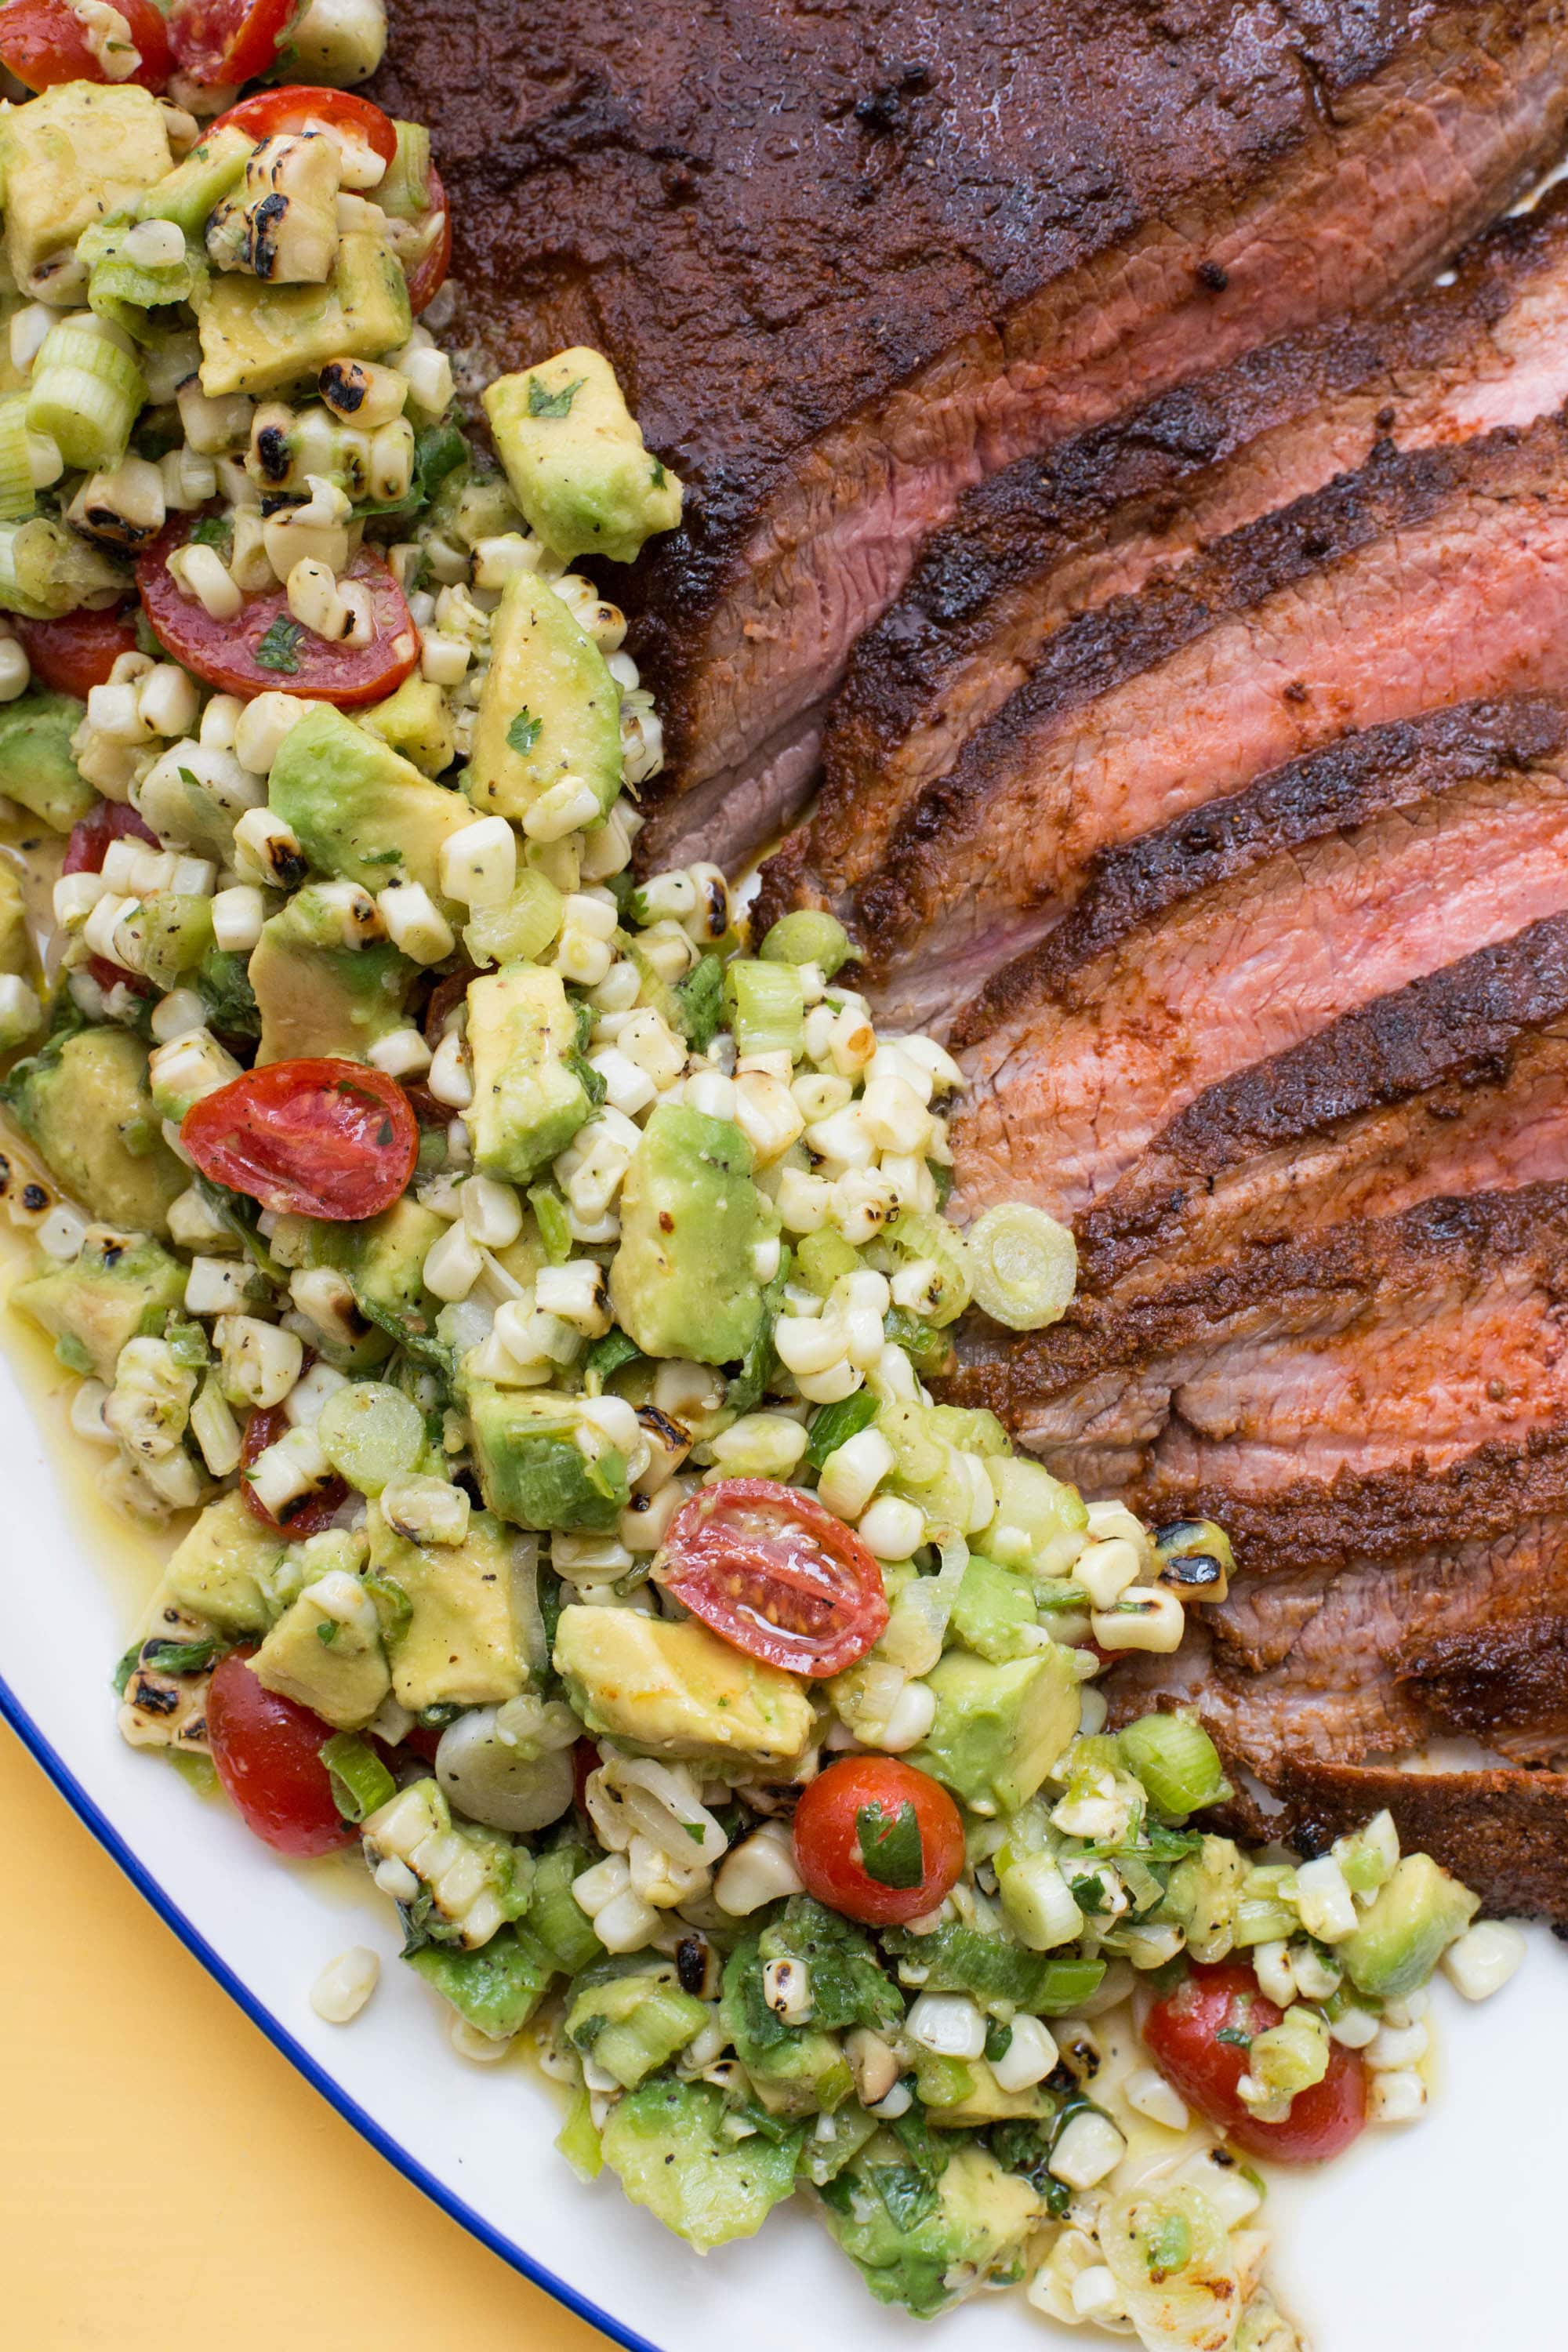 Slices of Chili Rubbed Flank Steak with Corn, Tomato and Avocado Salad.